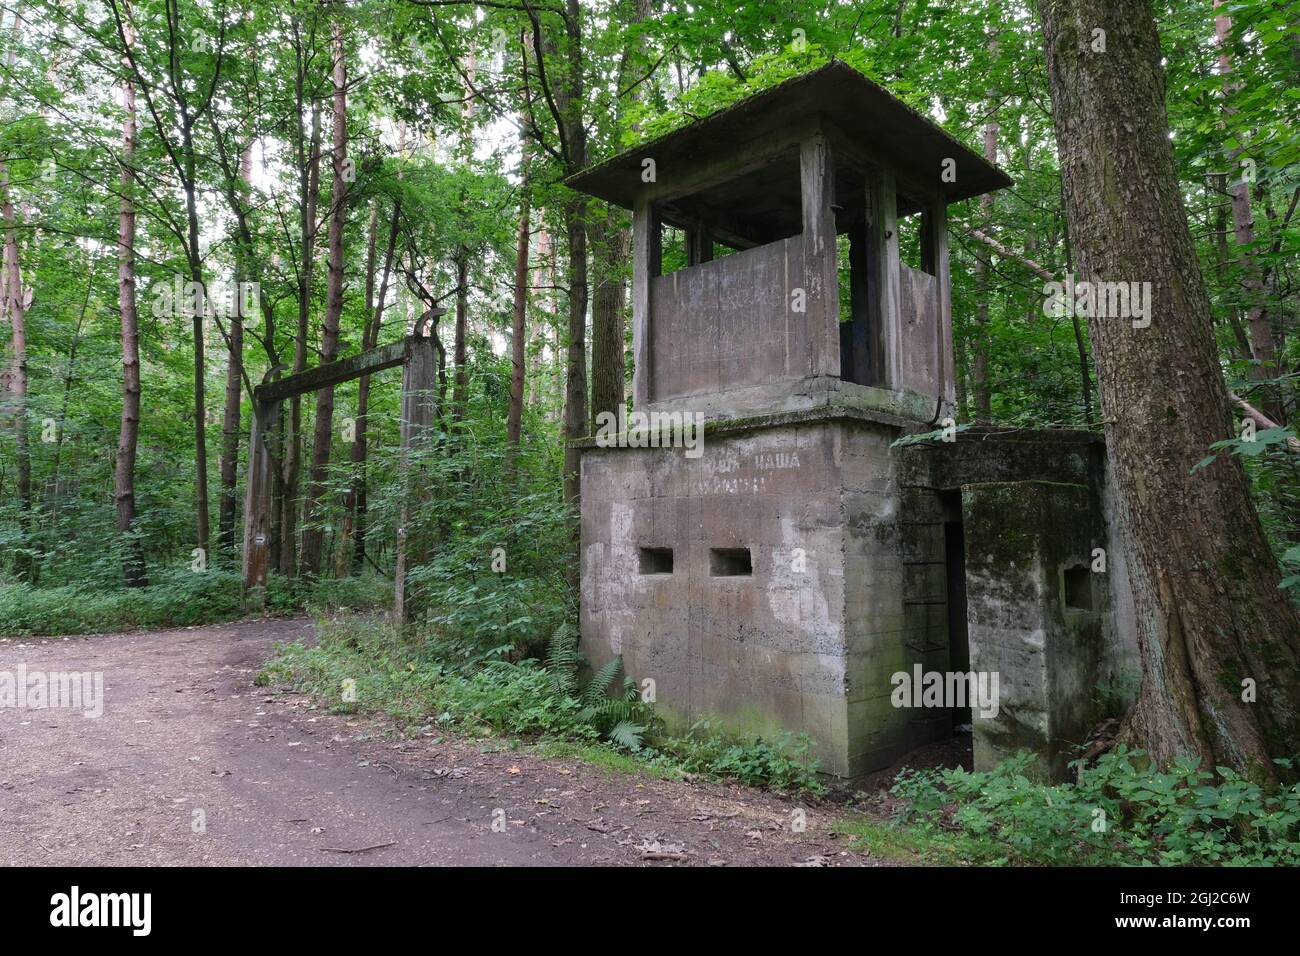 Kedzierzyn-Kozle, Poland - Blechhammer forced labor camp was one of the largest subcamp of Auschwitz. SS guards outpost and trucks entry Stock Photo